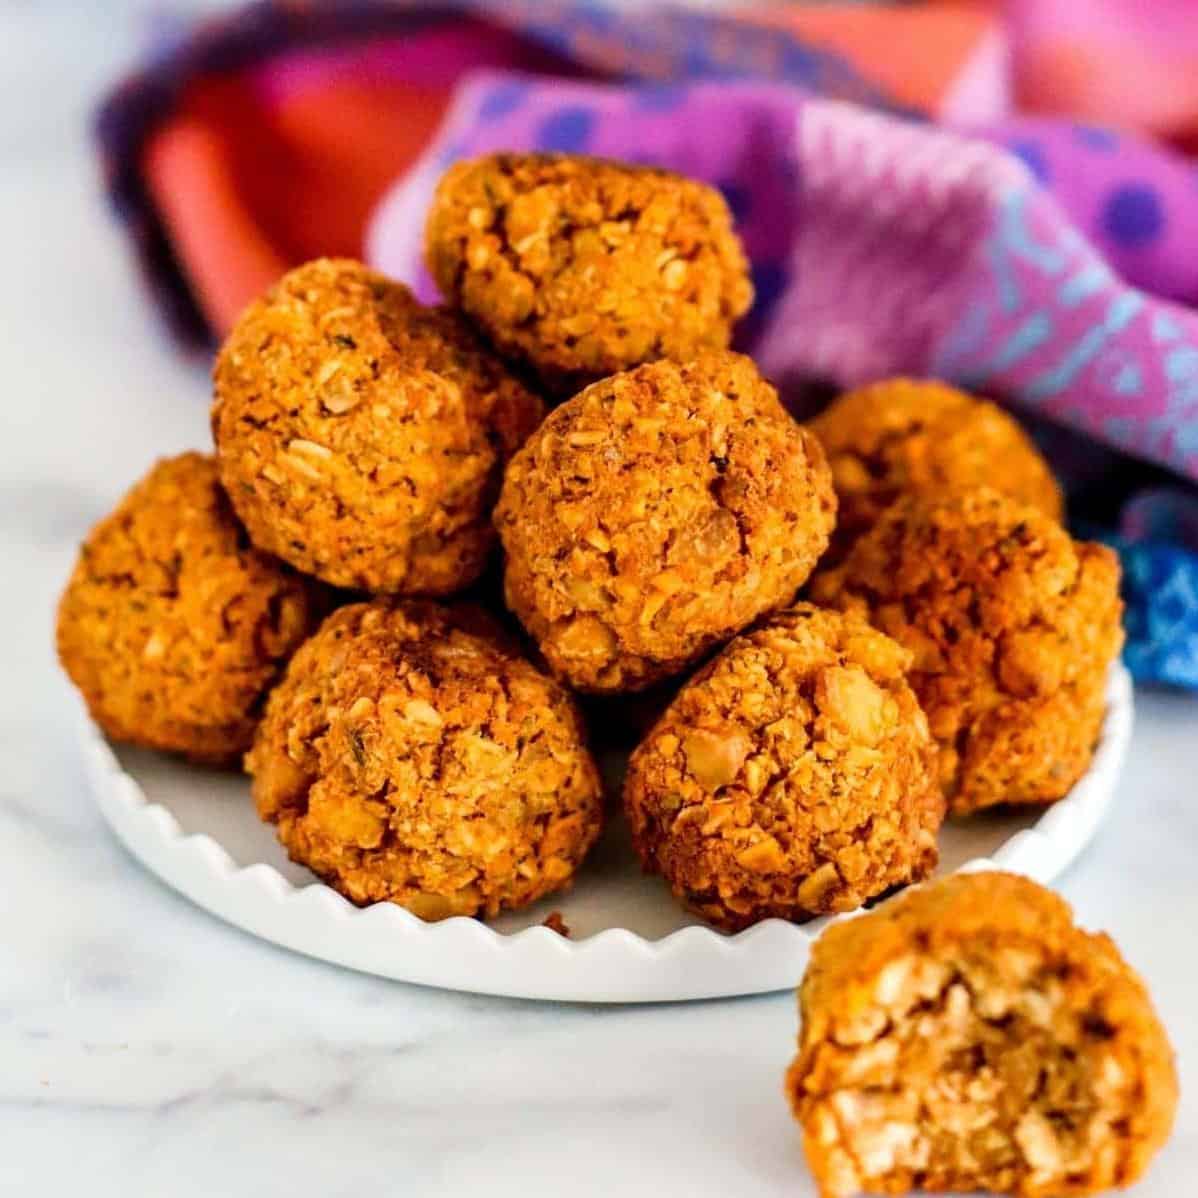  Get ready to roll up your sleeves and make these mouthwatering vegan tofu balls.